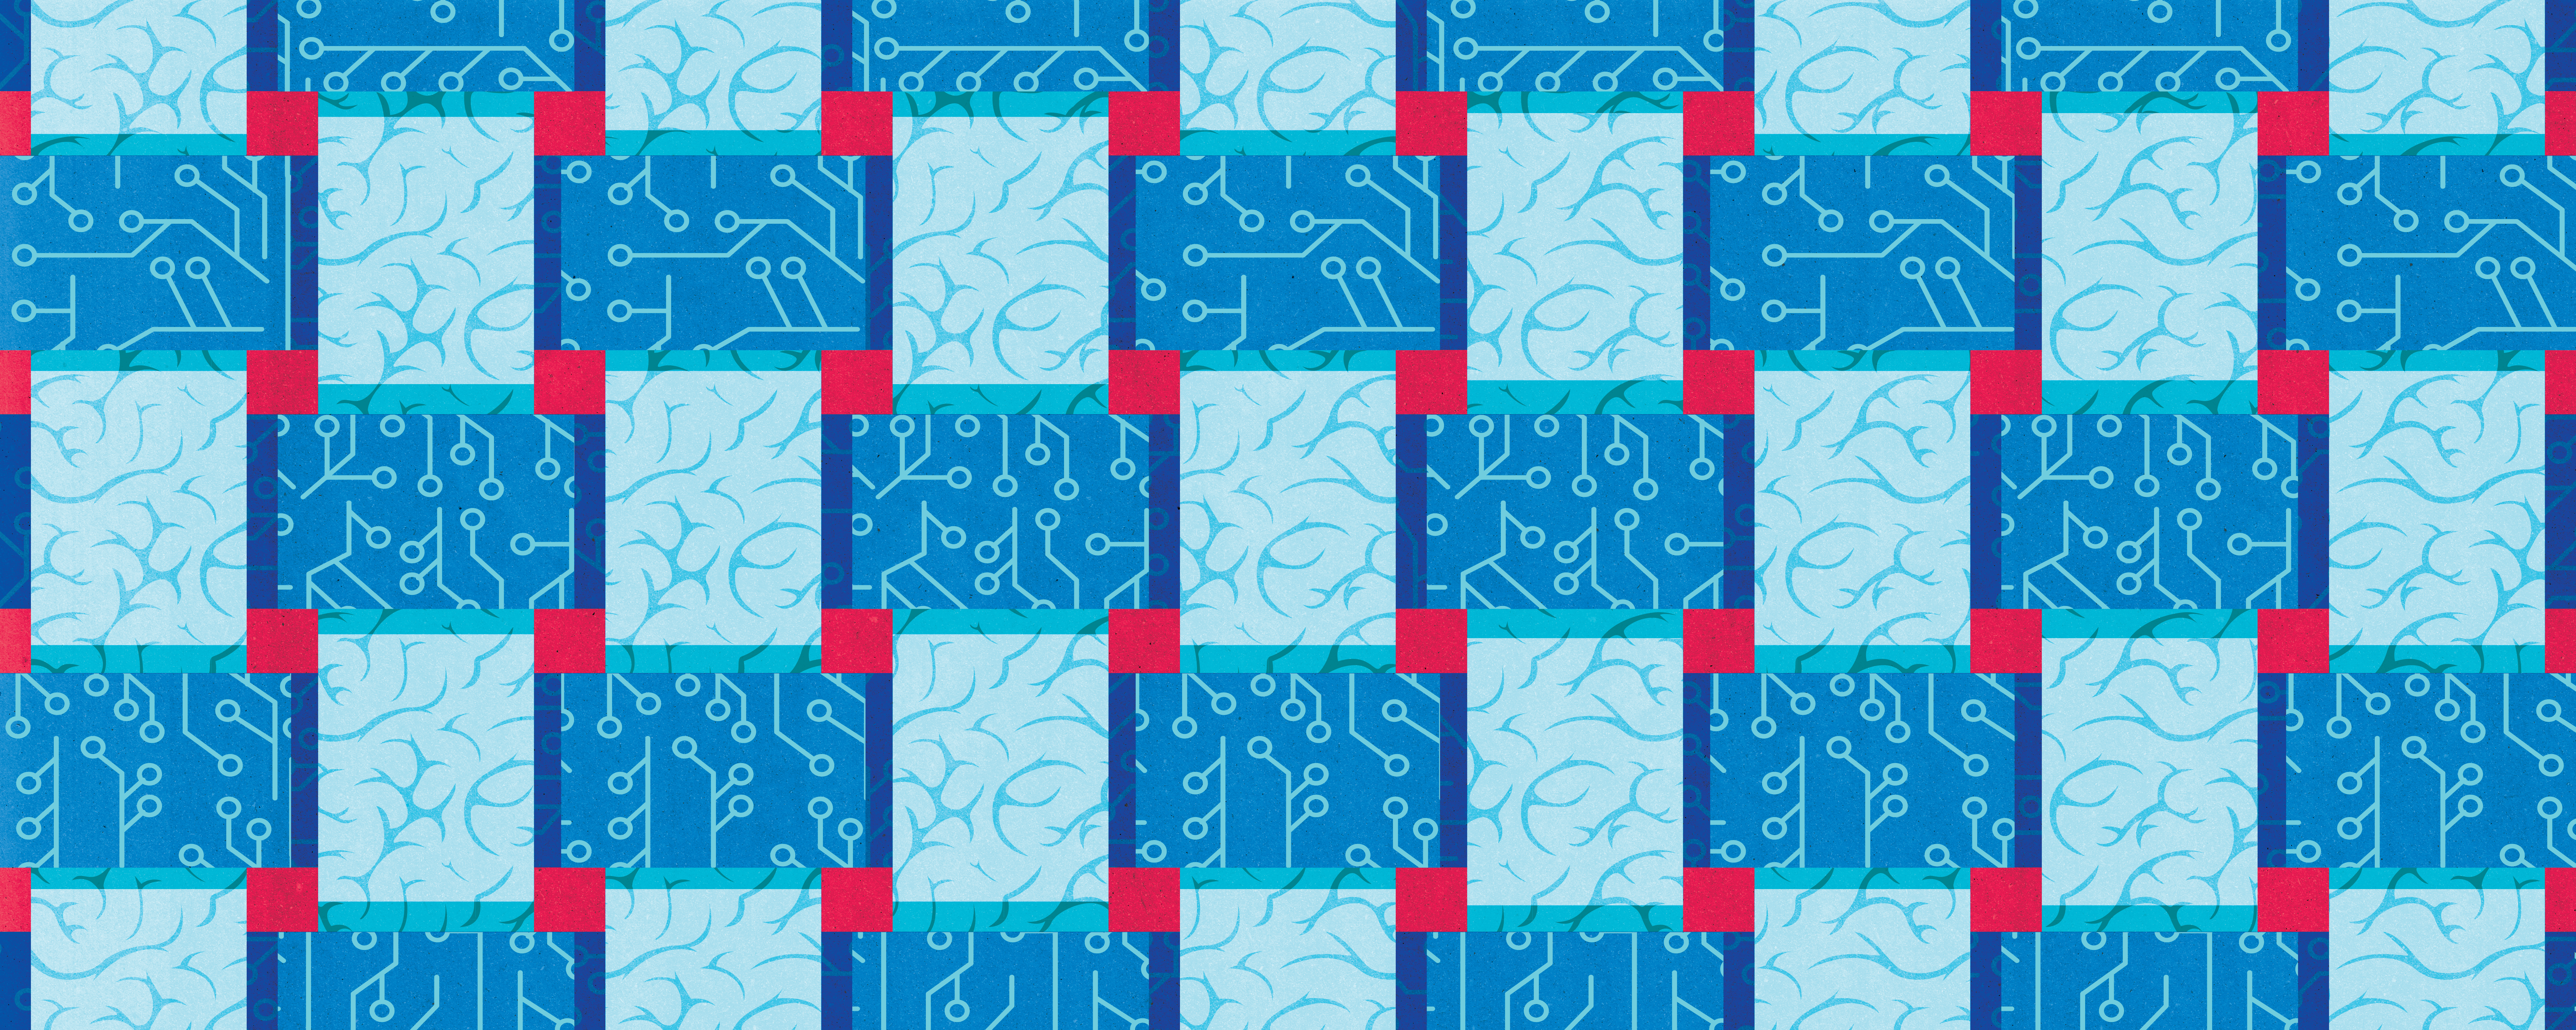 Pattern of nuerons in different shades of blue and red